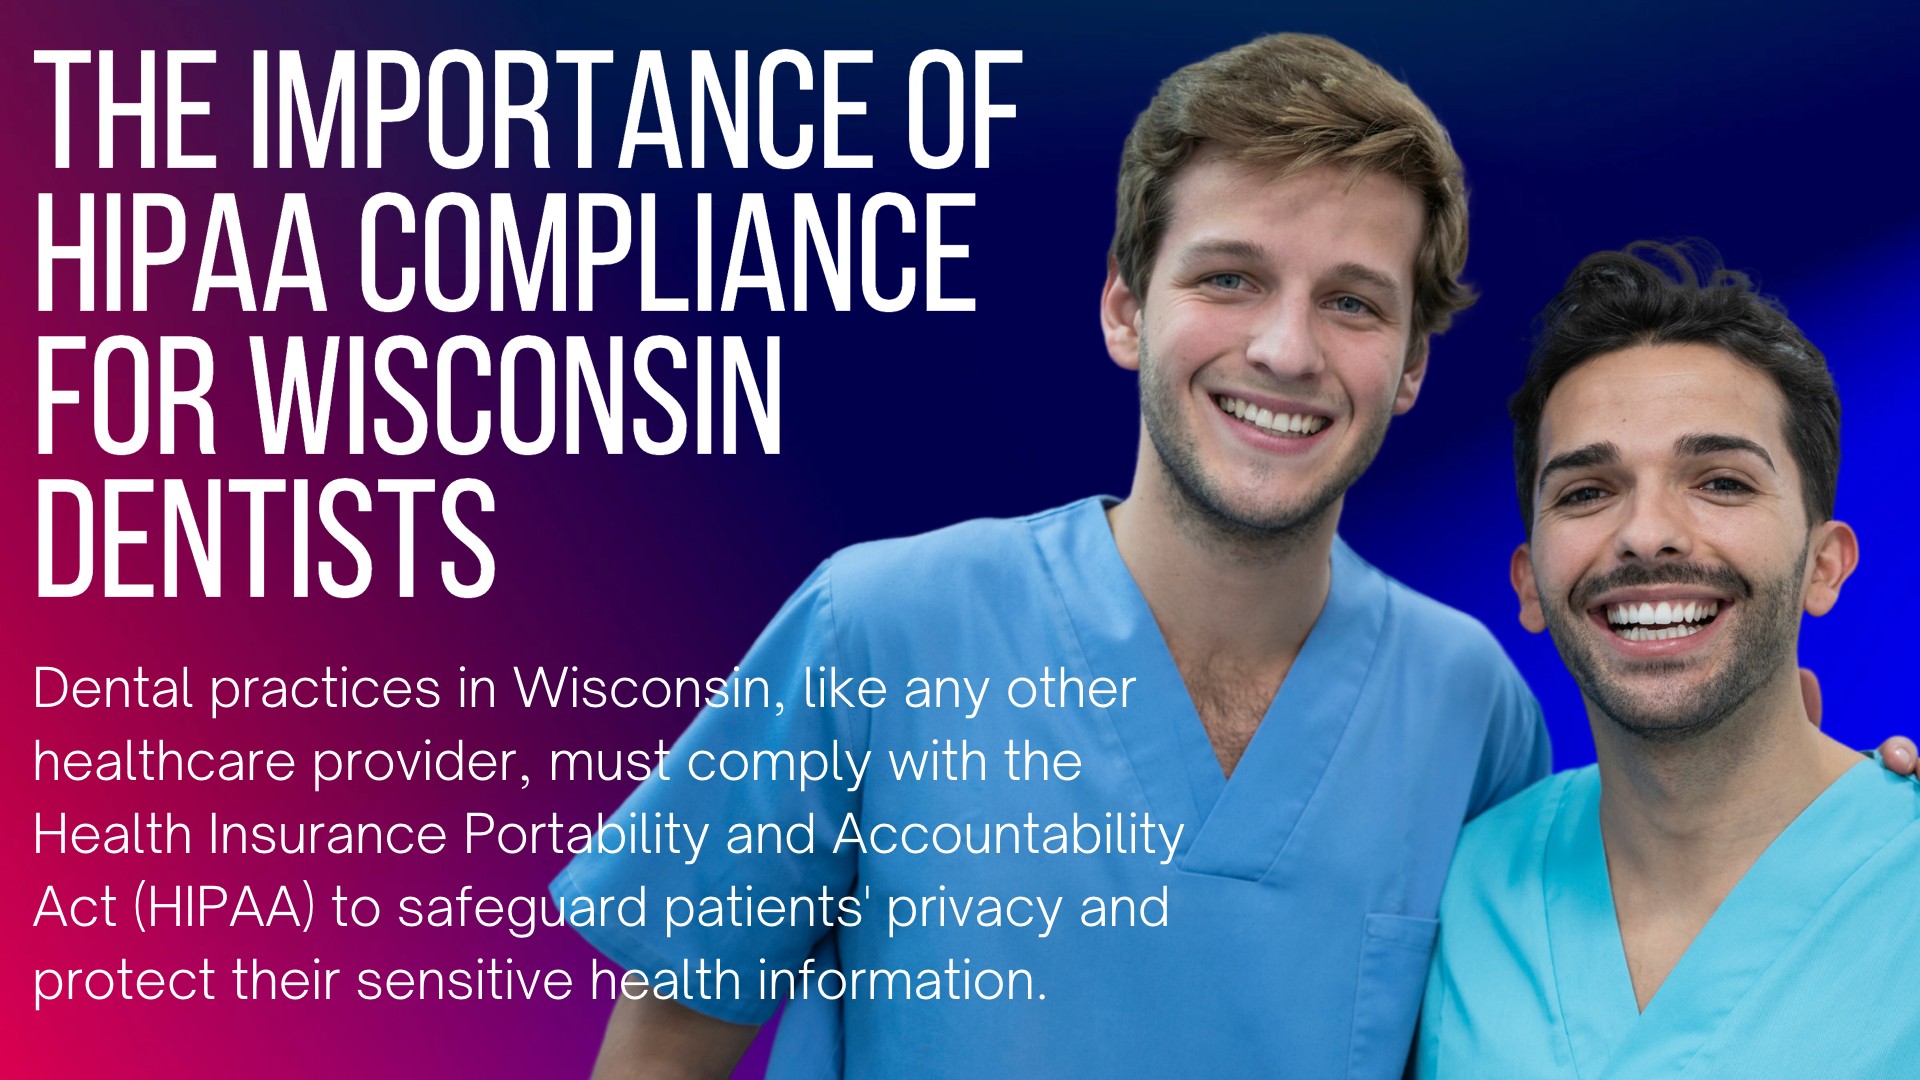 Achieving HIPAA Compliance for Dental Practices in Wisconsin